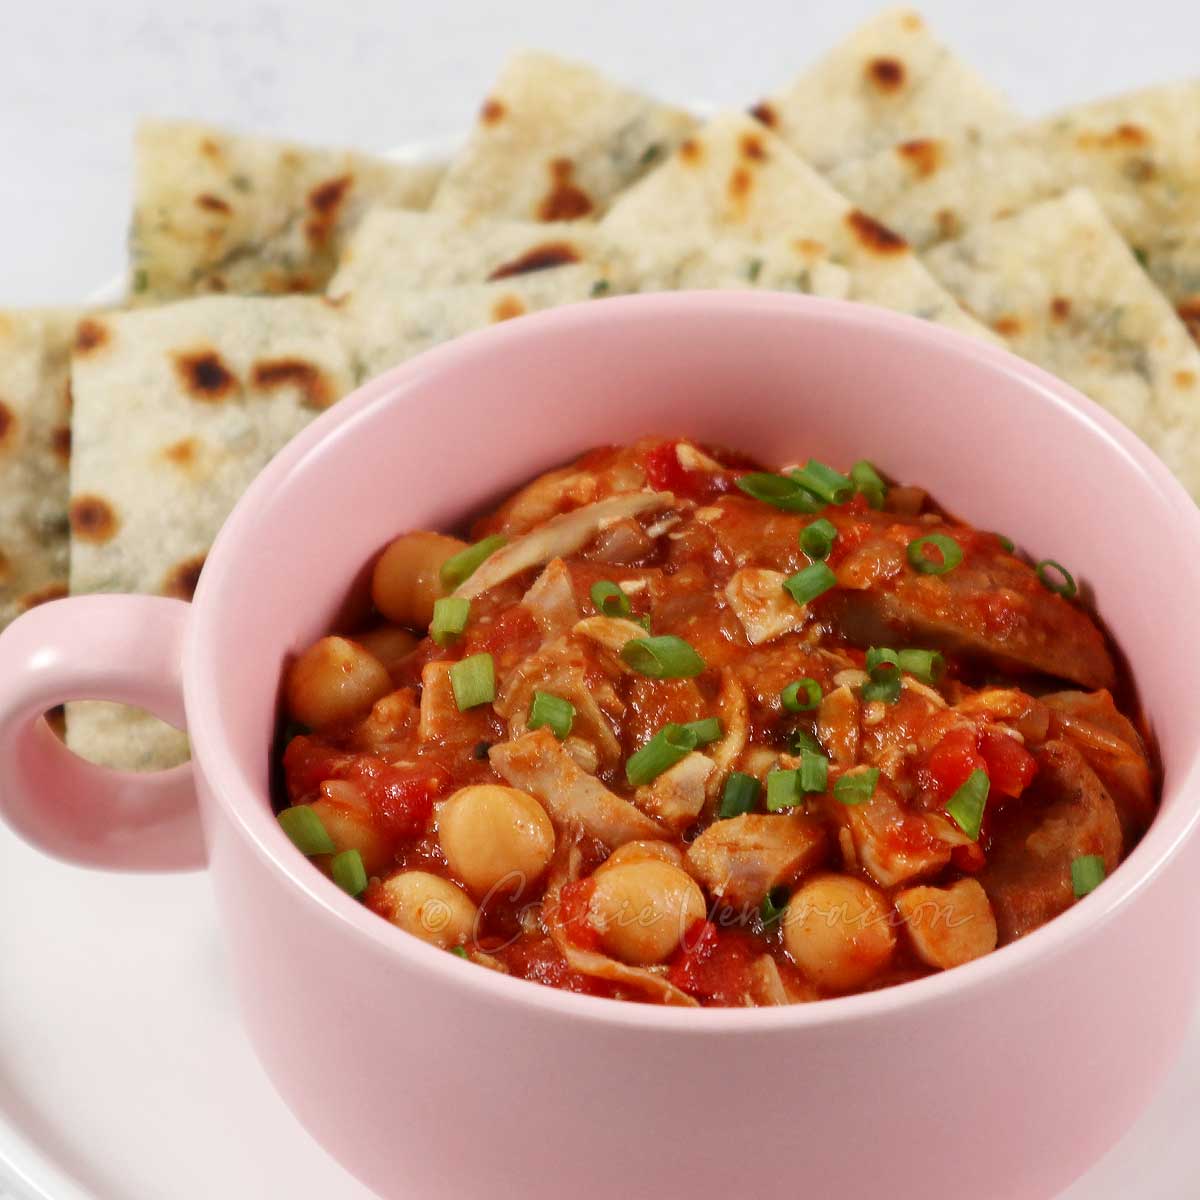 Chickpea stew cooked with leftover roast chicken.